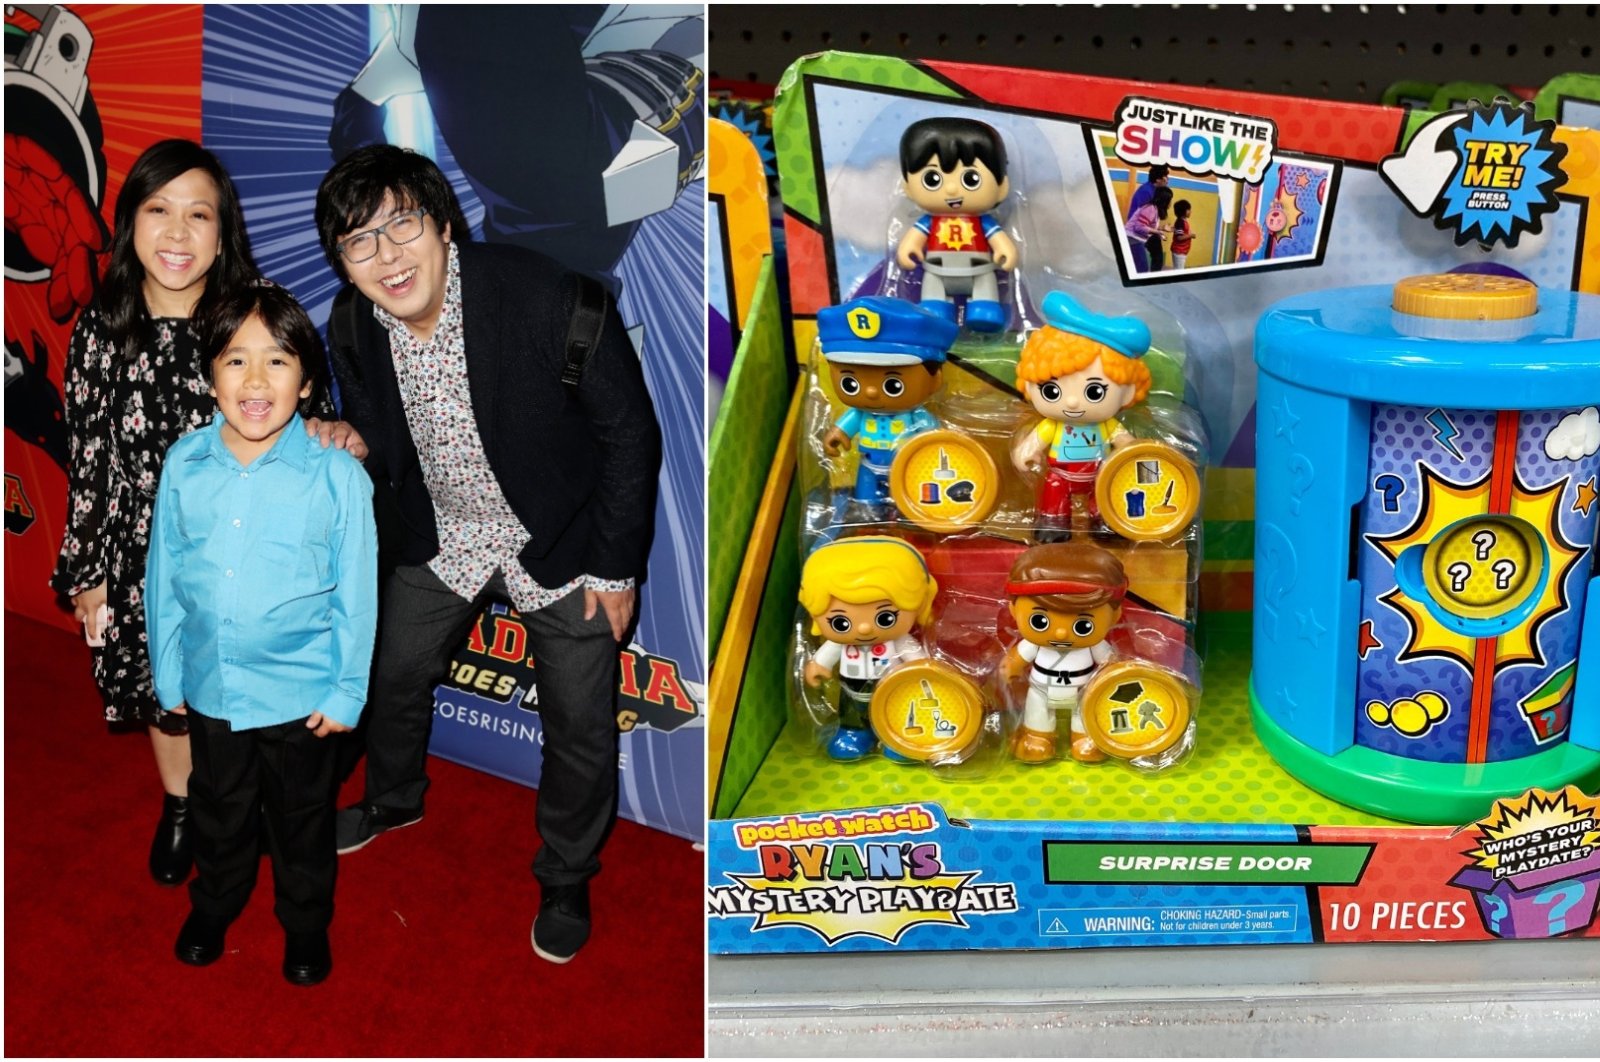 Combination photo shows (L-R) Loann Kaji, Ryan Kaji and Shion Kaji attending "My Hero Academia: Heroes Rising" premiere at Westwood, California on February 19, 2020 and the game Mystery Play date by Pocket Watch featuring Ryan. (Getty Images / Shutterstock)